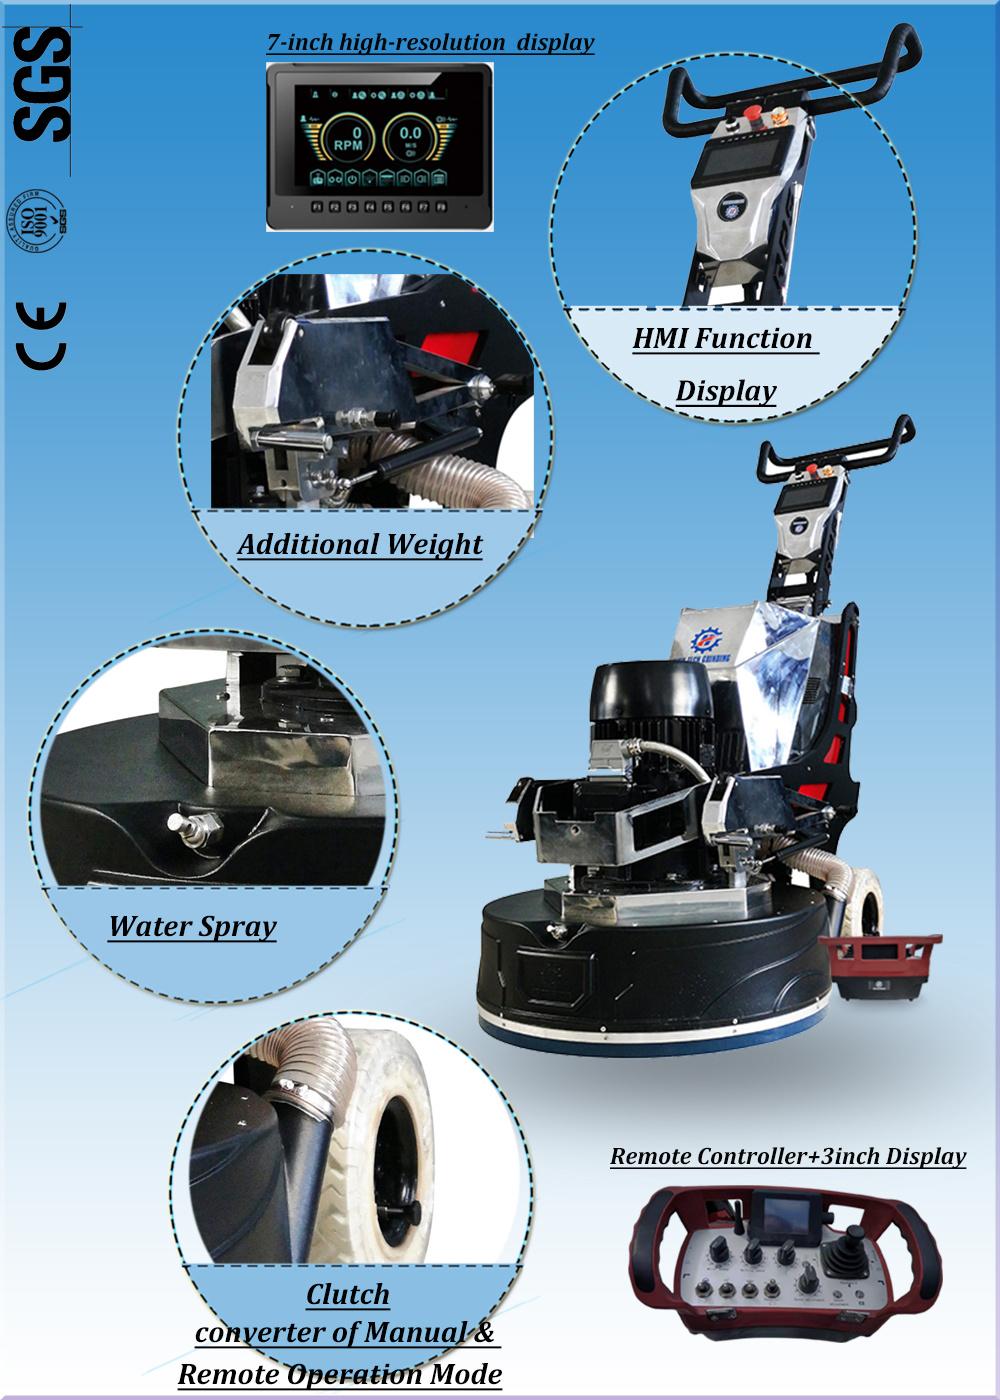 Robert Remote Control Floor Polisher Machine Automatic Walking Without Manual Propulsion Floor Grinder